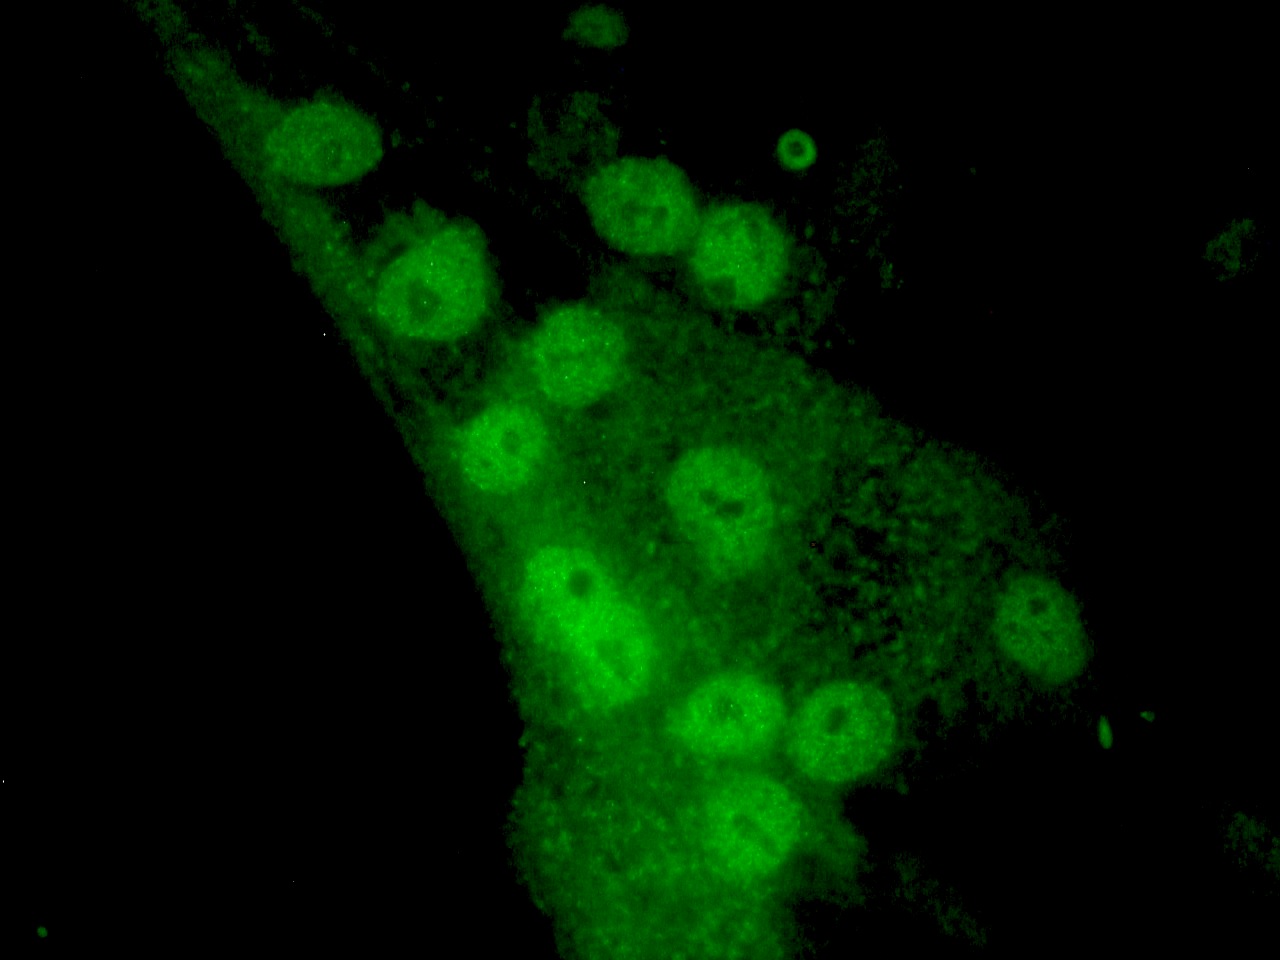 Figure 2. MyoD1 immunostaining of nuclei in MyoD1 transfected cells induced to undergo muscle cell differentiation.